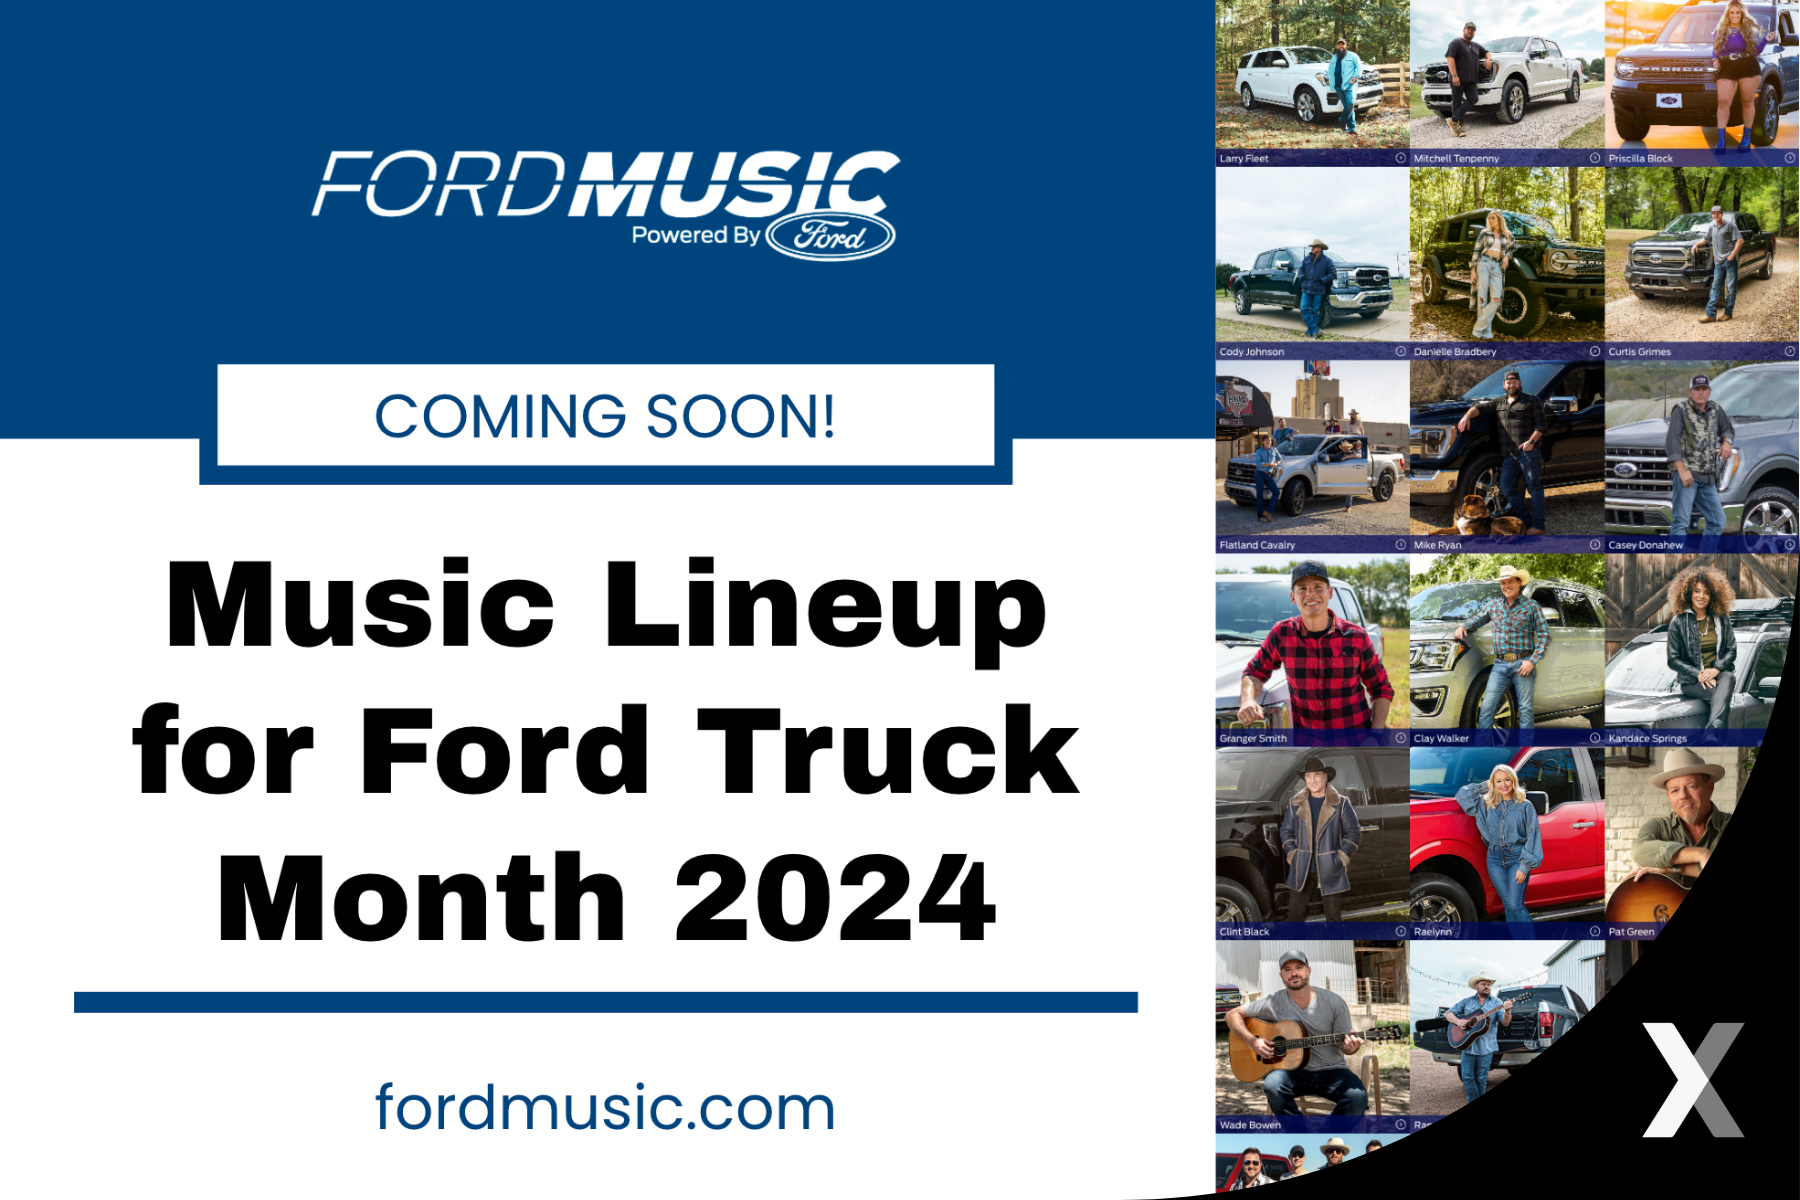 Music Lineup for Ford Truck Month 2024